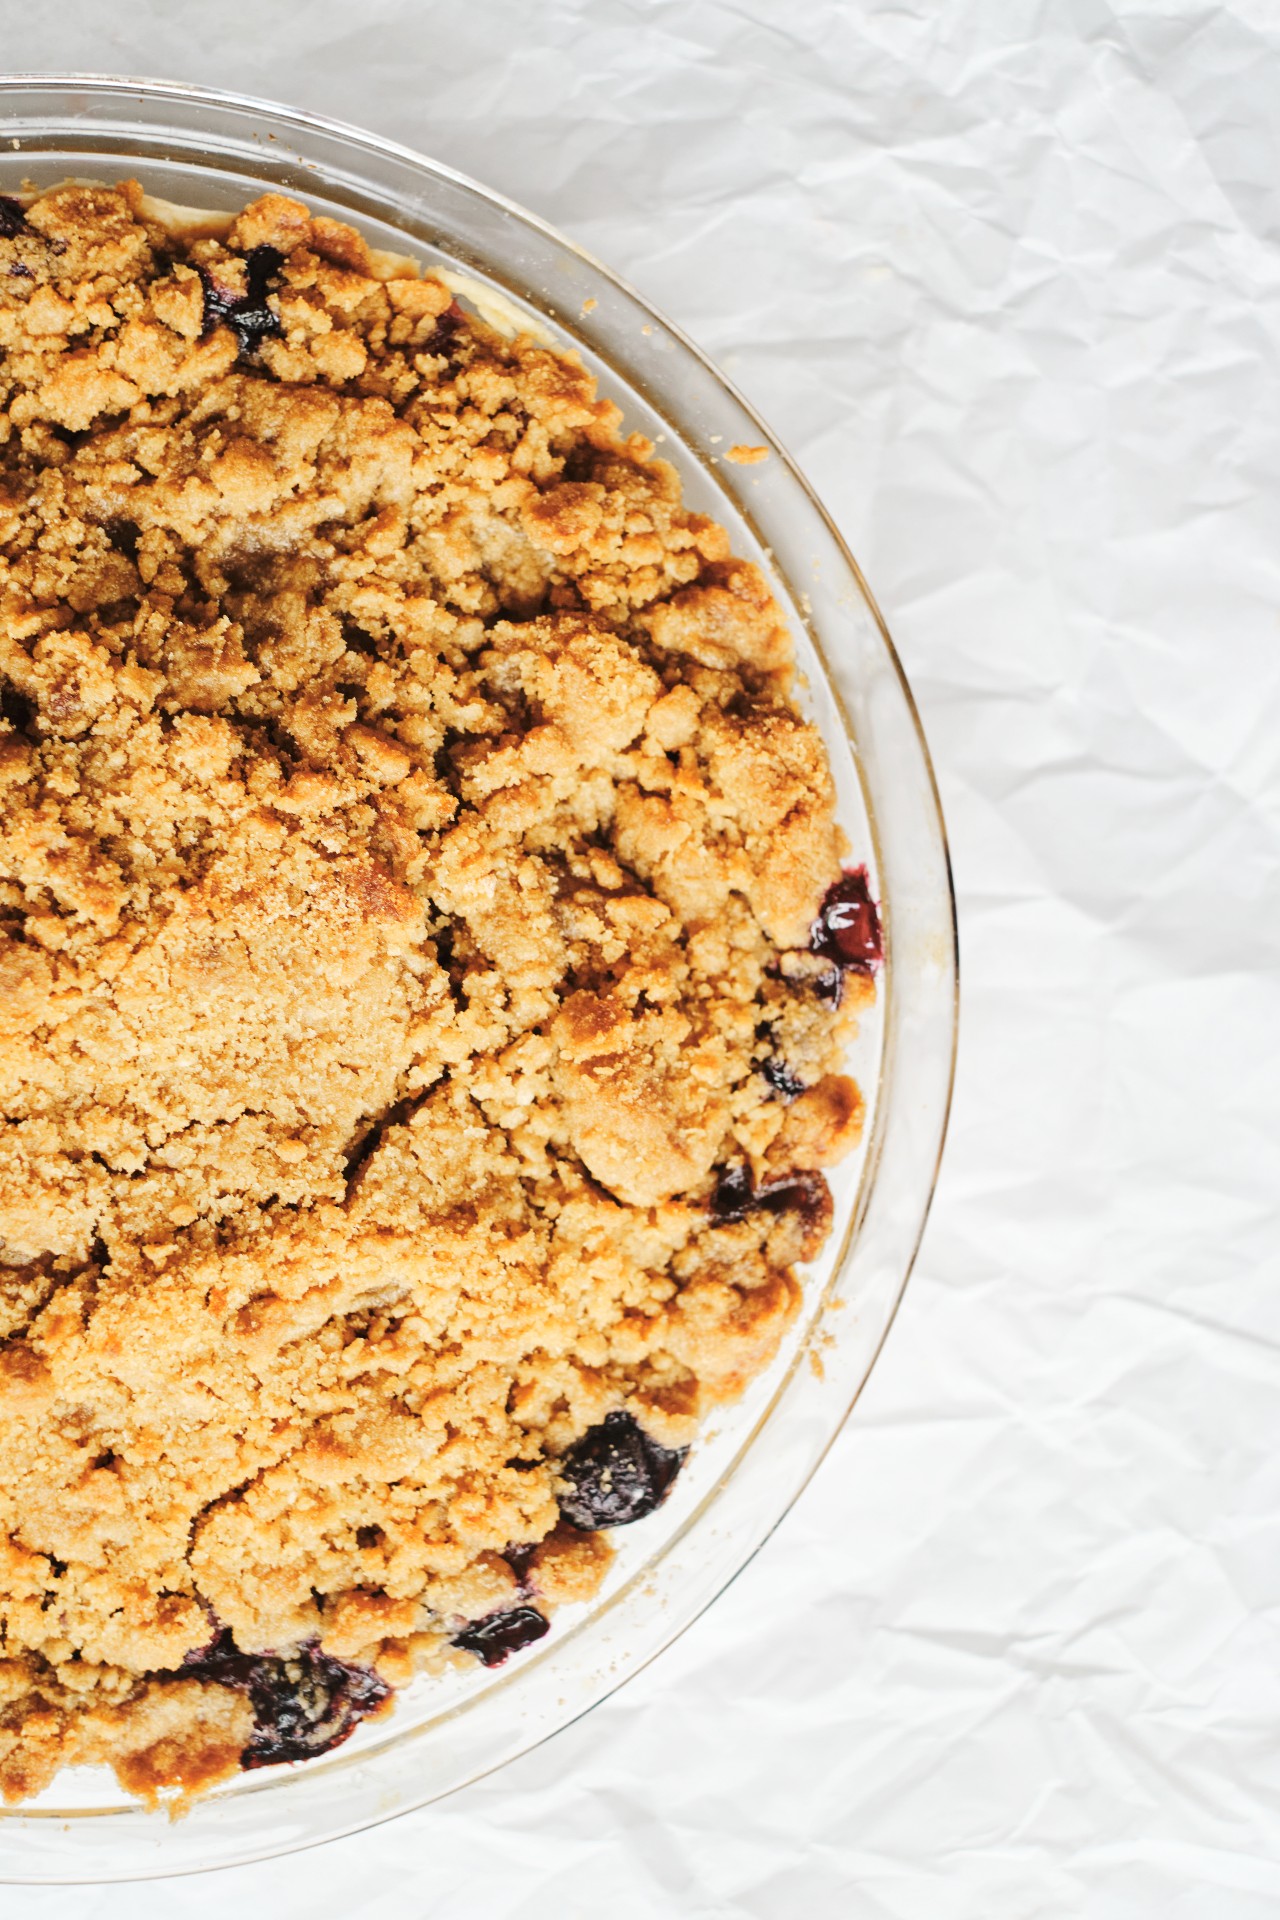 Blueberry Crumble Pie is baked and is shown close up.